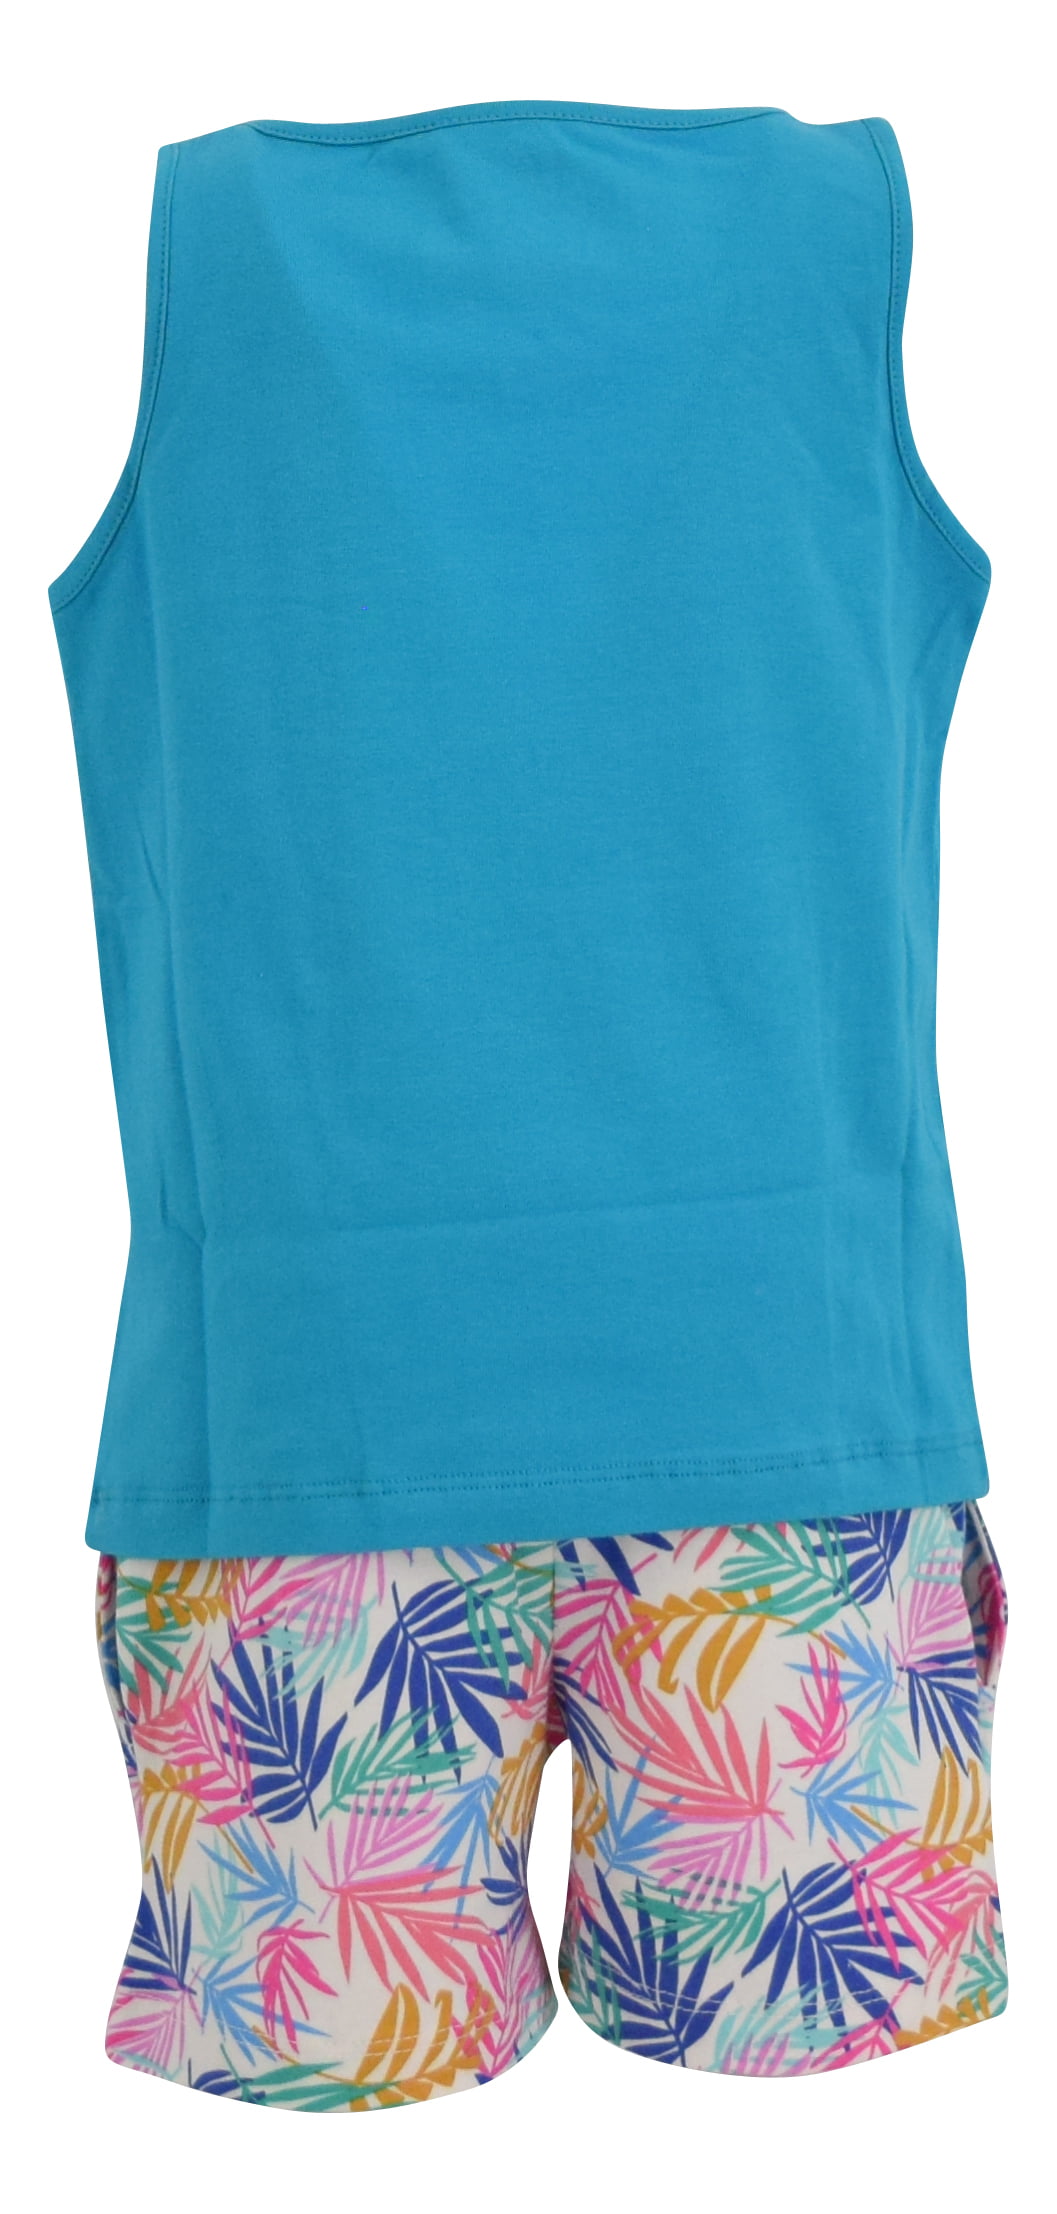 Unique Baby Boys 2 Piece Palm Leaf Print Tank Top and Pull On Shorts Outfit 